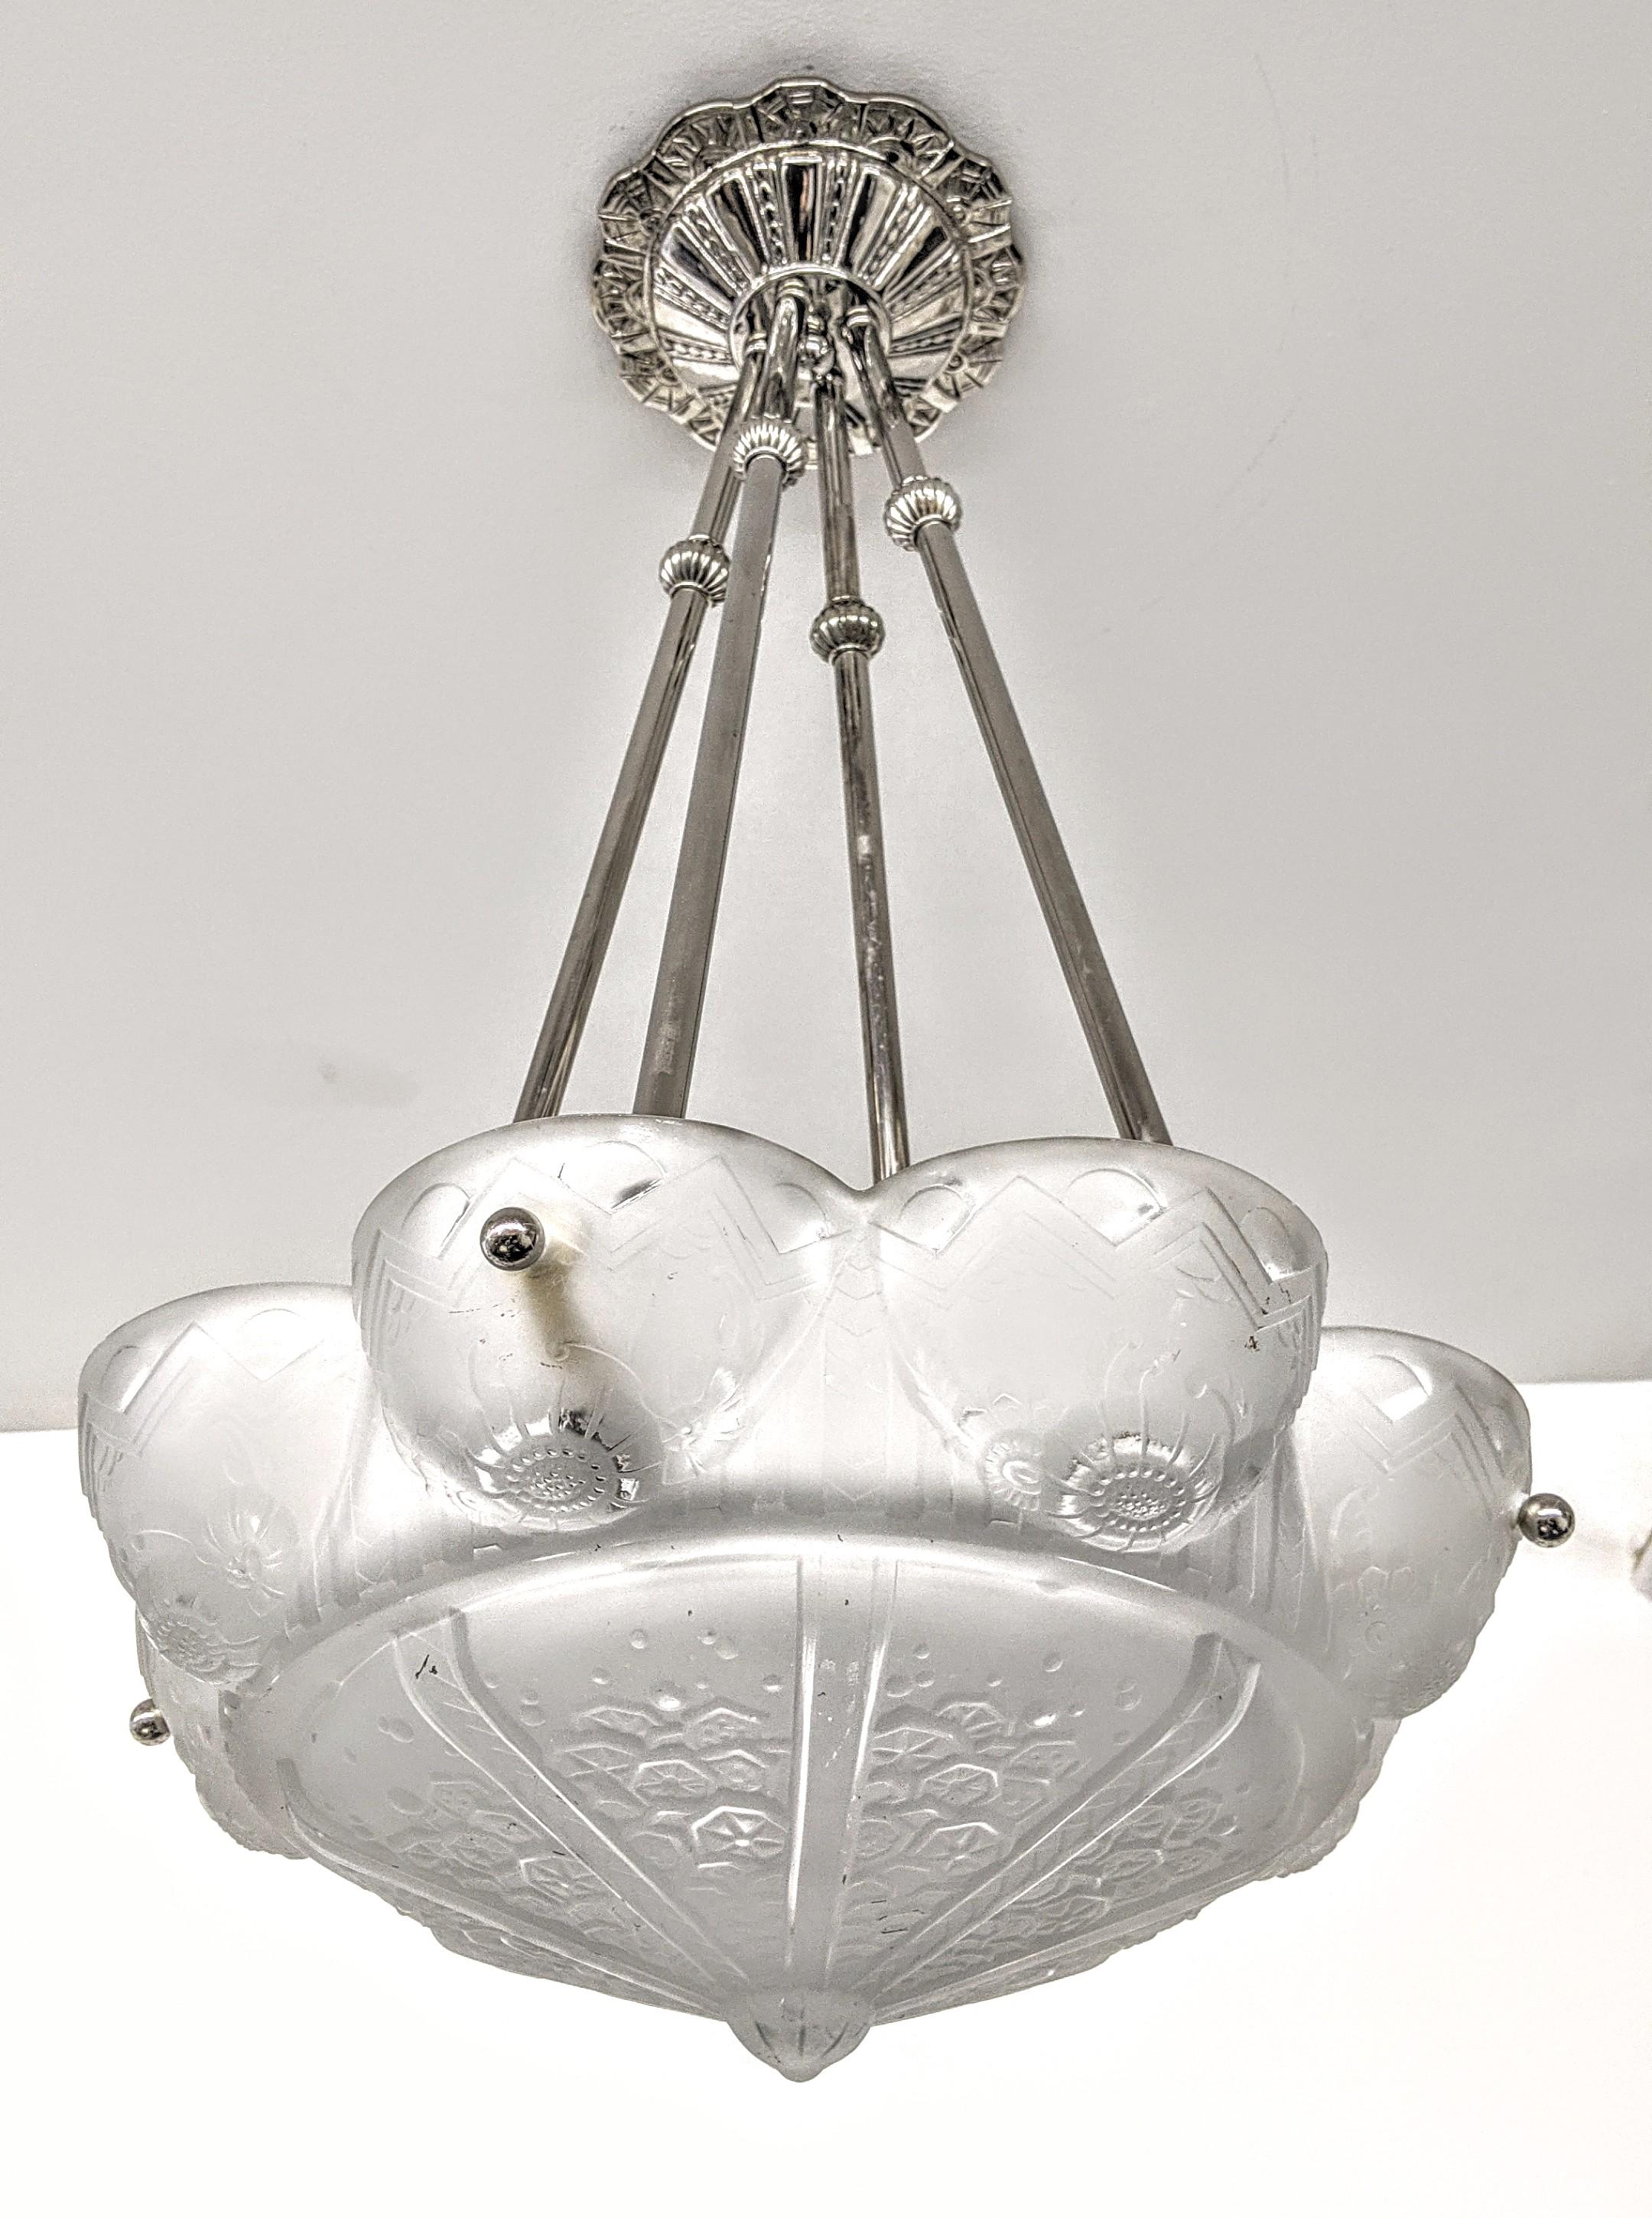 A French Art Deco pendant chandelier by the French artist-signed, marked “Muller Freres Luneville“. Clear frosted molded glass shades decorated with intricate geometric flowers polished motif details held by four rods with a dash of decorative balls